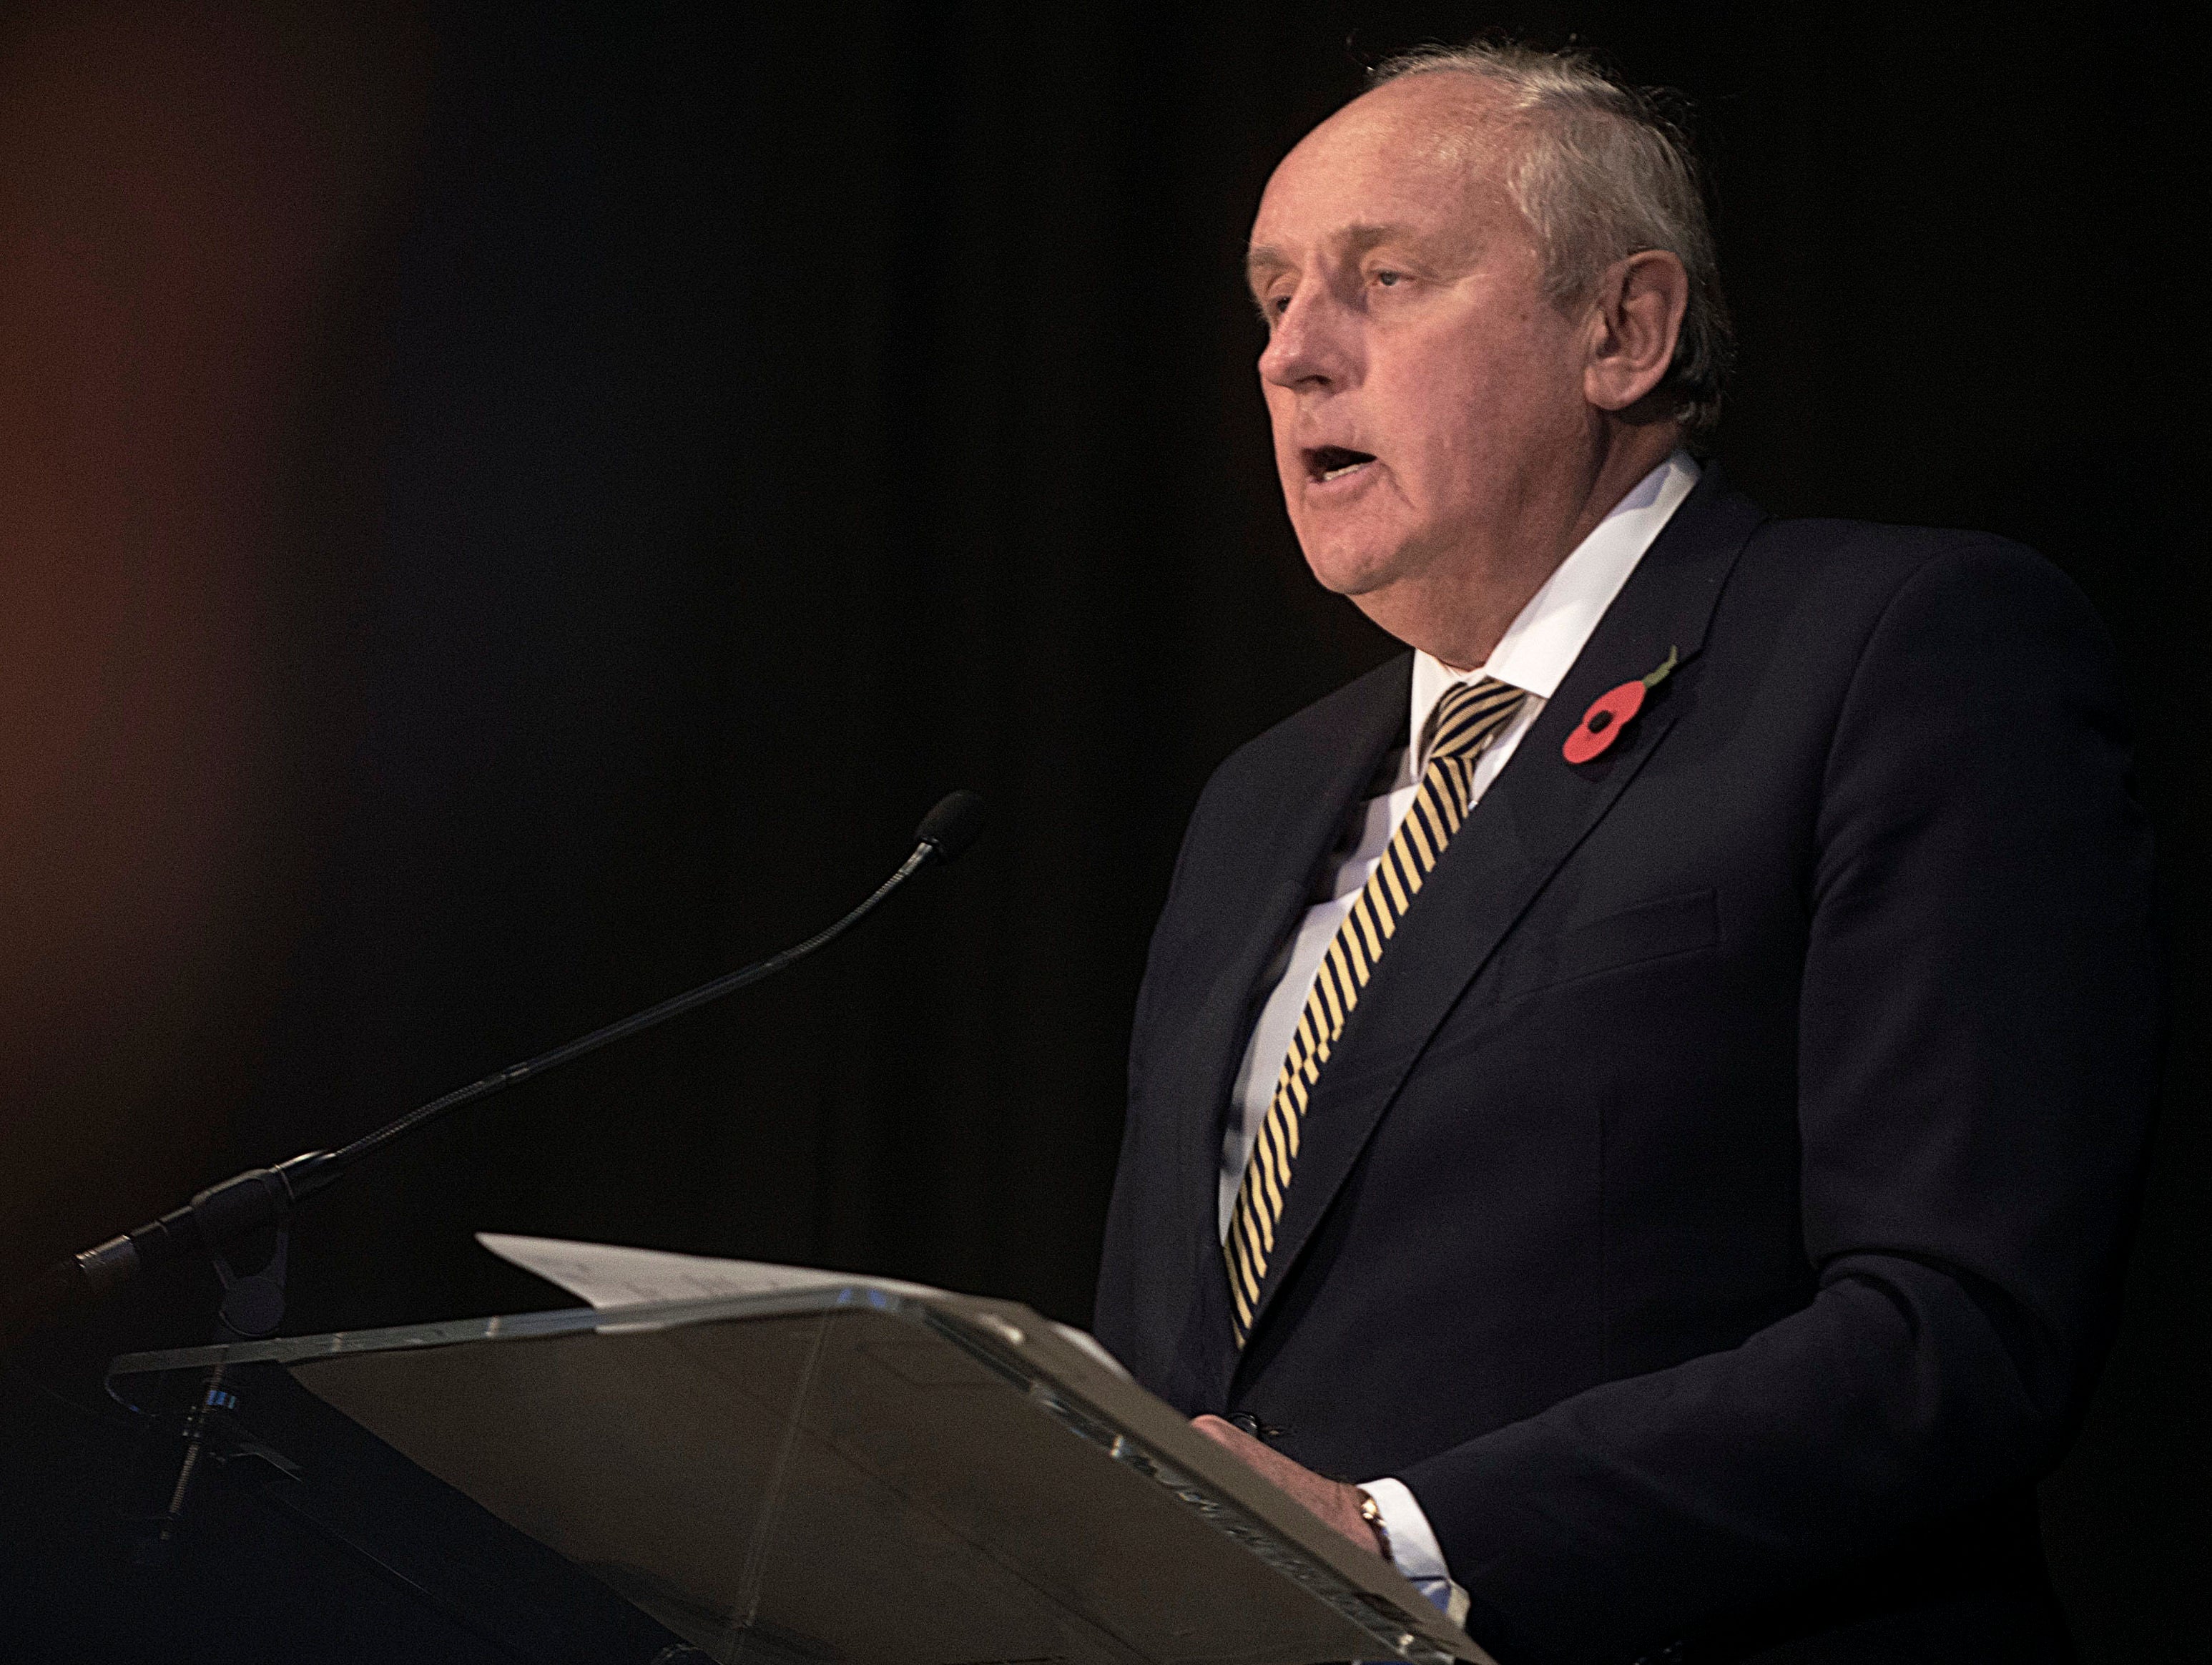 Ex-Daily Mail editor Paul Dacre's Society of Editors' Conference 2018 speech in full